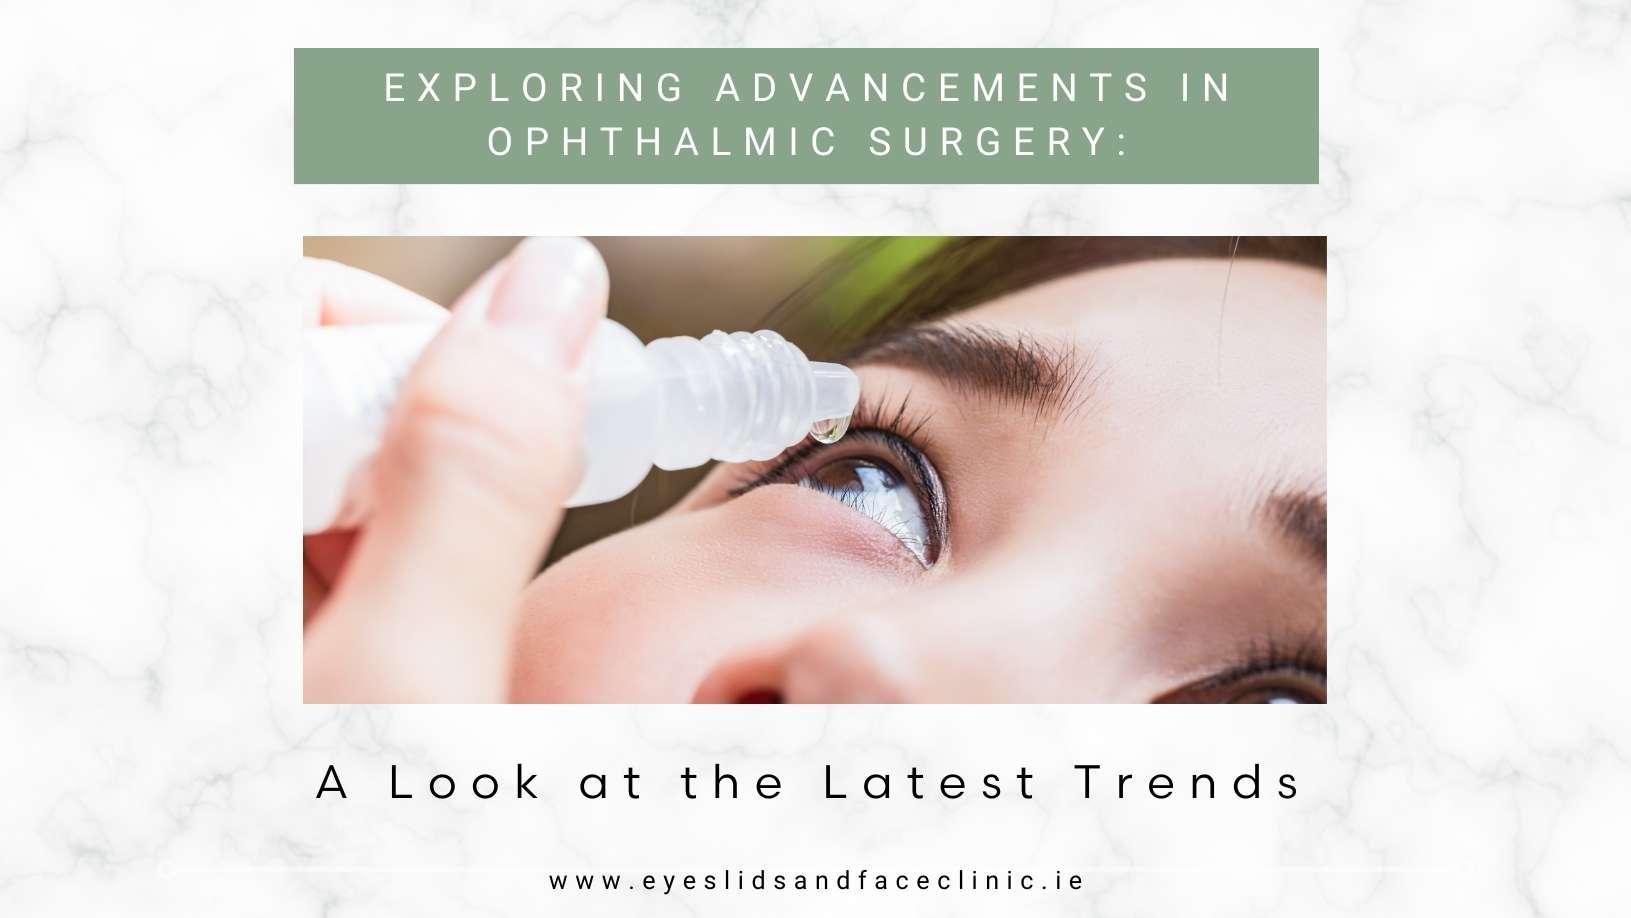 Exploring Advancements in Ophthalmic Surgery